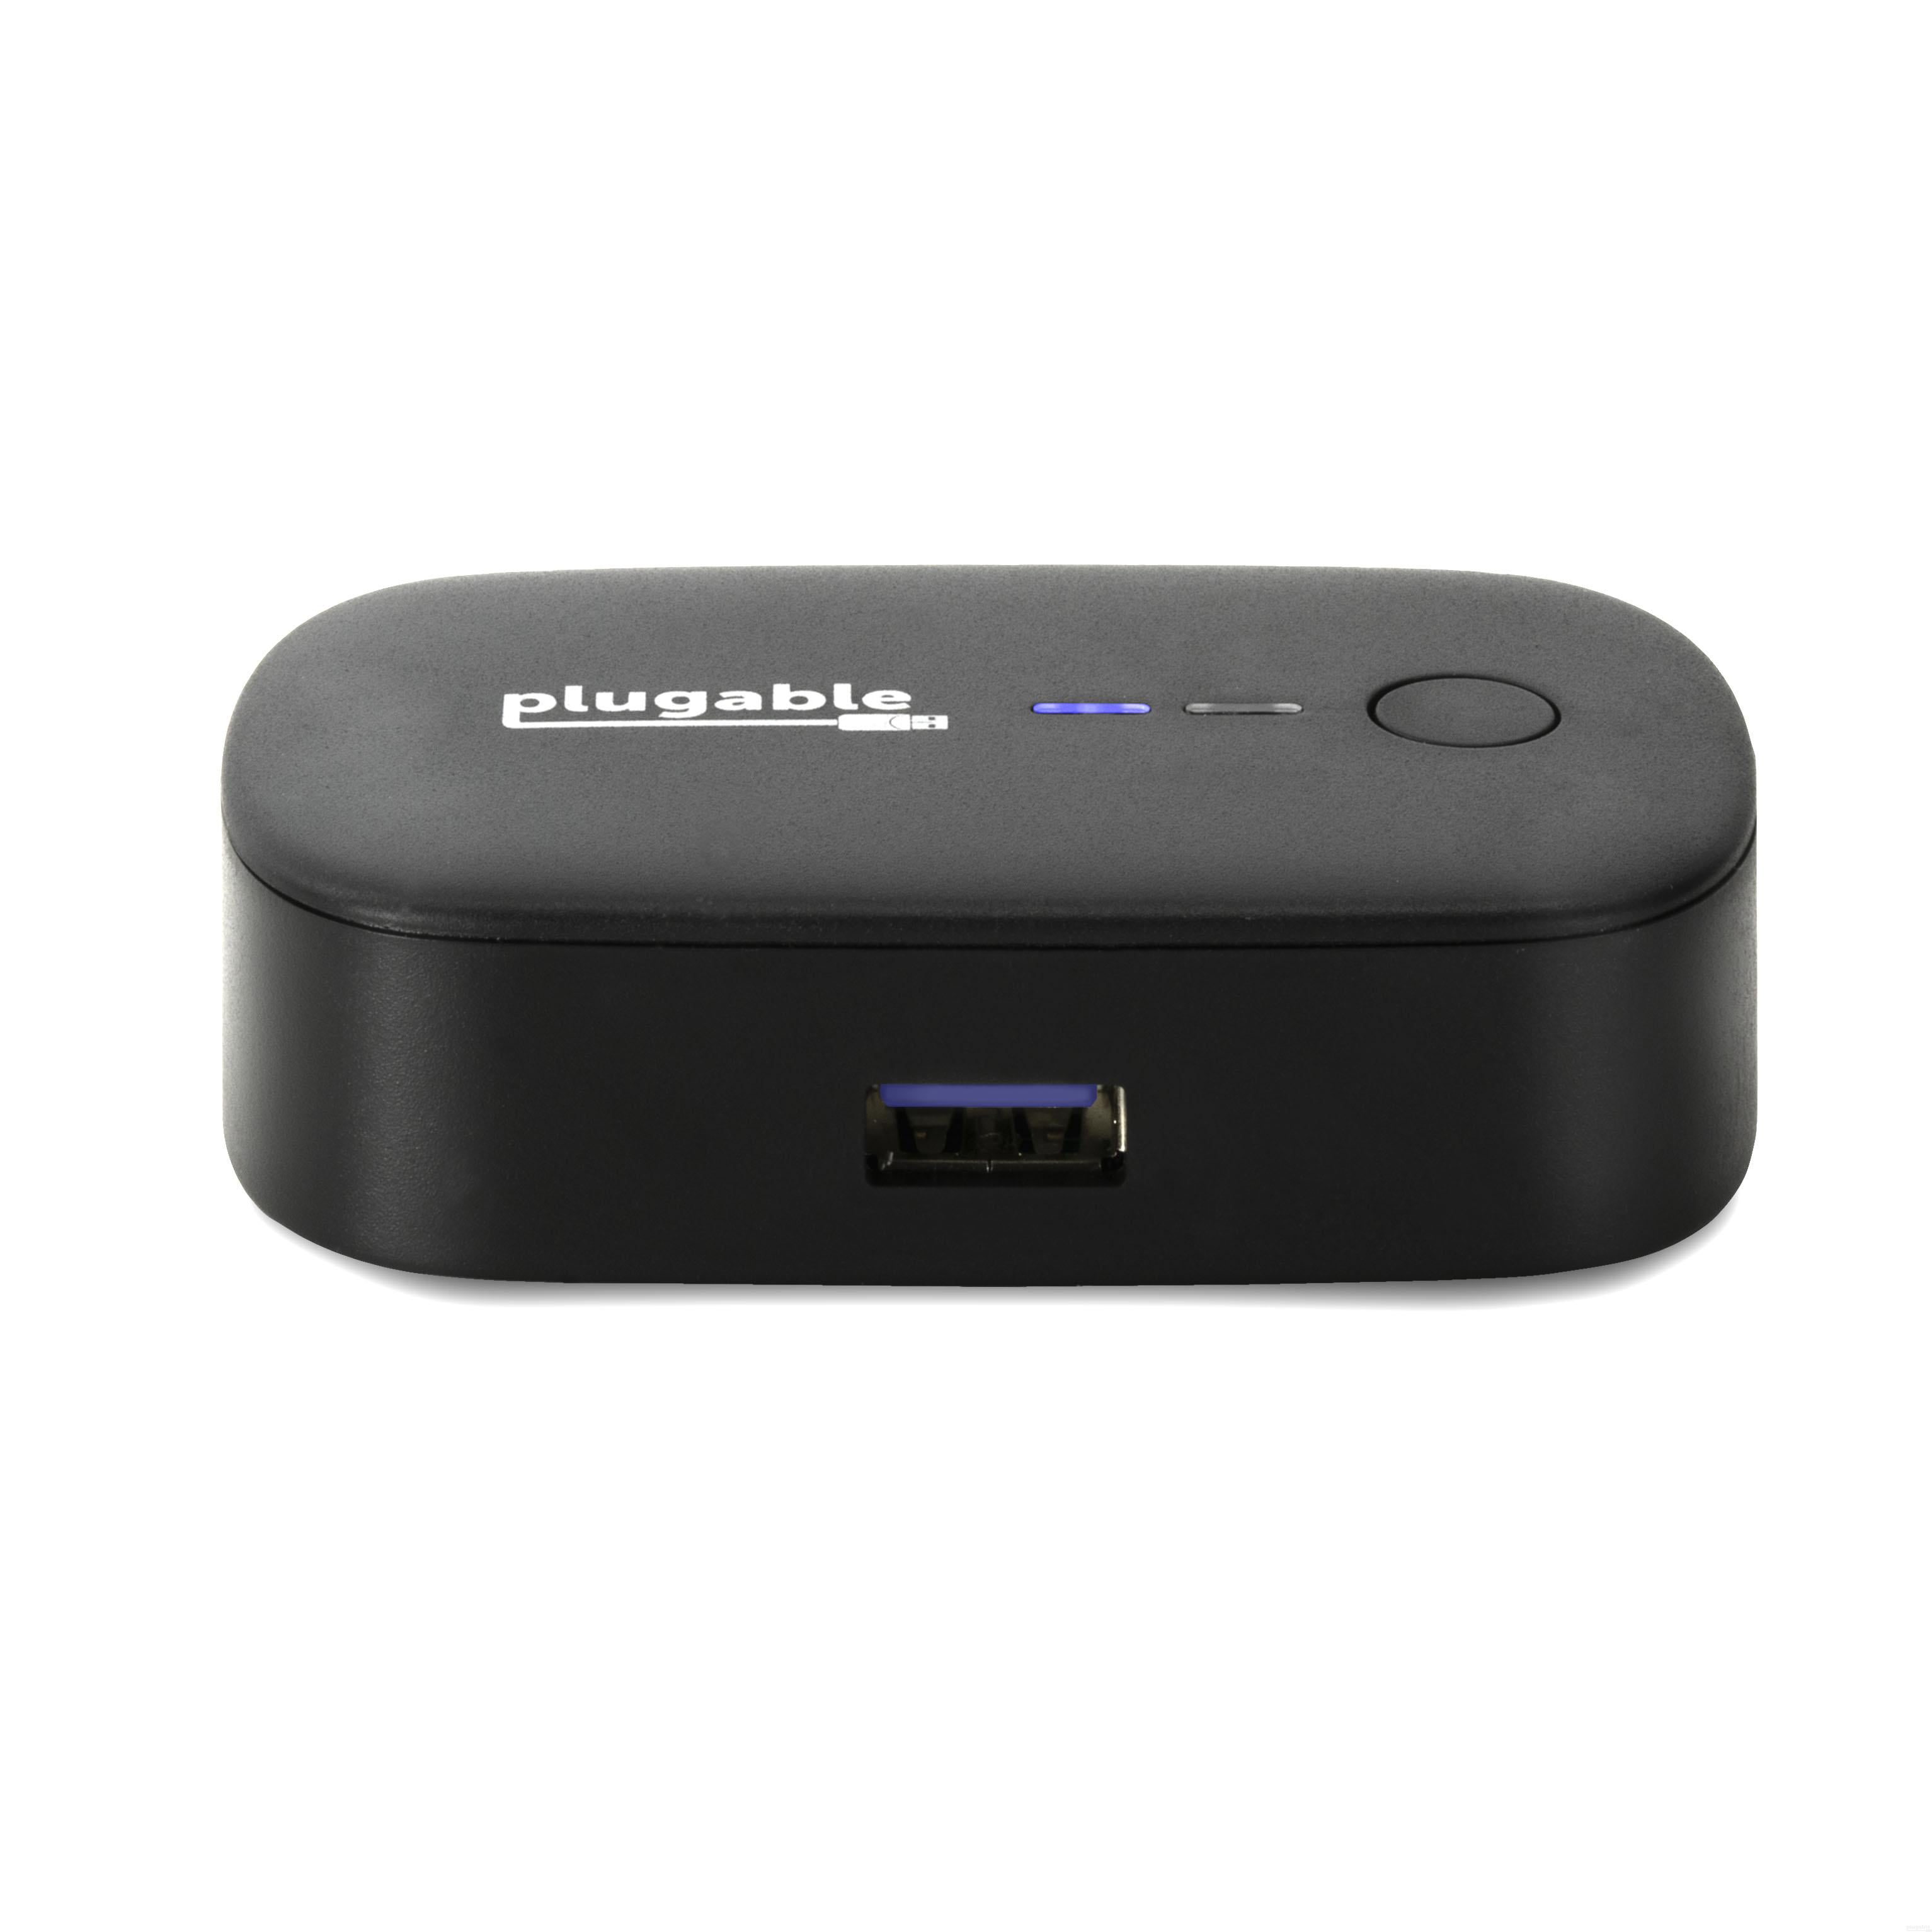 Plugable USB 3.0 Sharing for One-Button Swapping of USB Device Hub Between Two Computers (A\B Switch) - Walmart.com